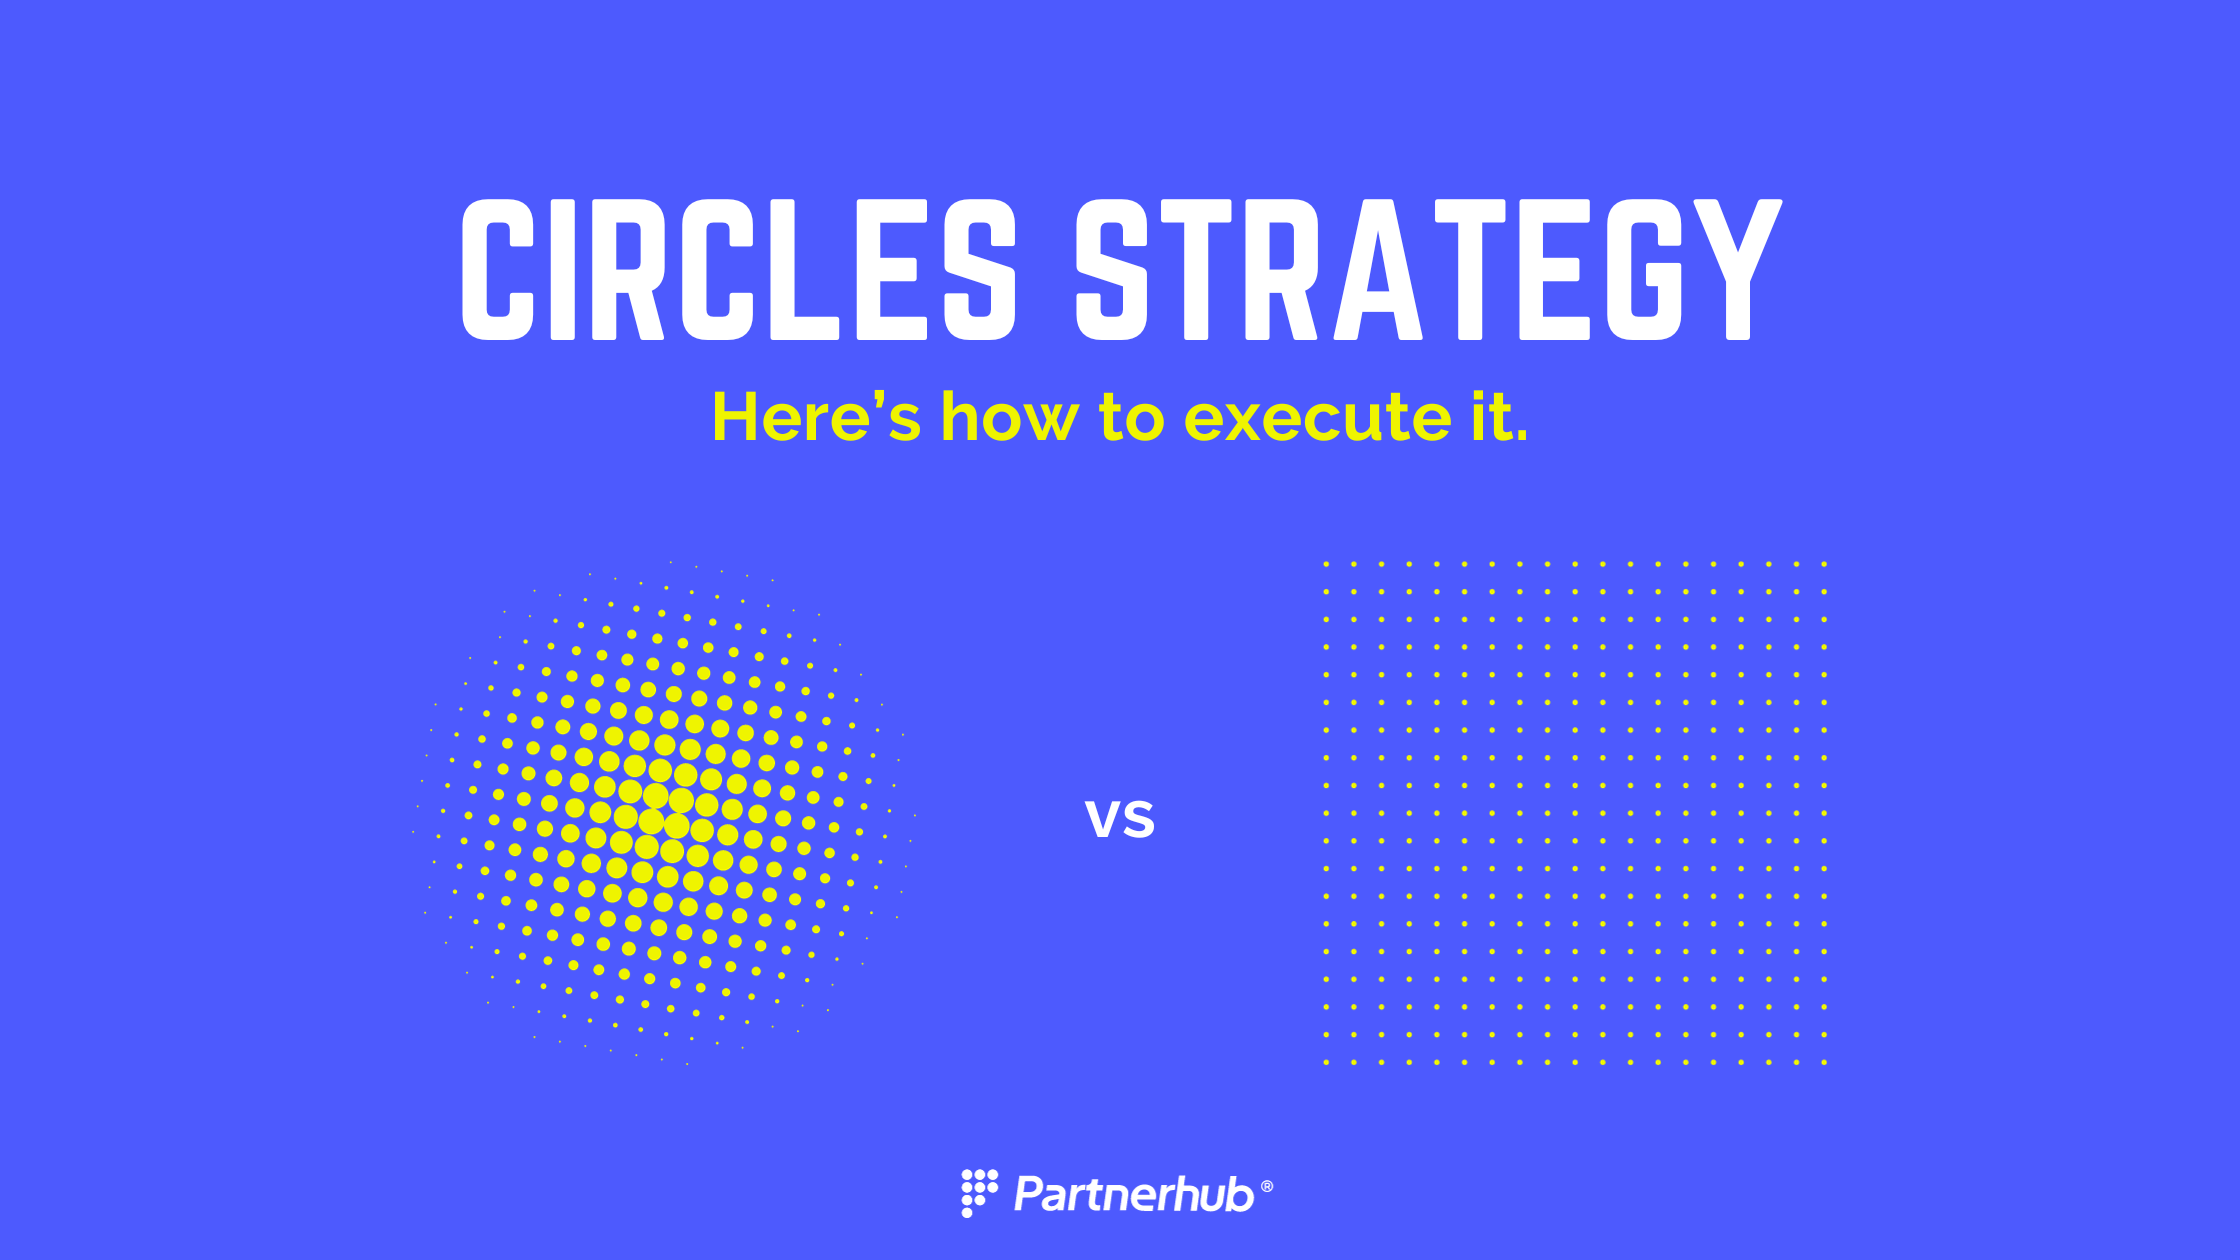 Why and how to create circle partnerships.